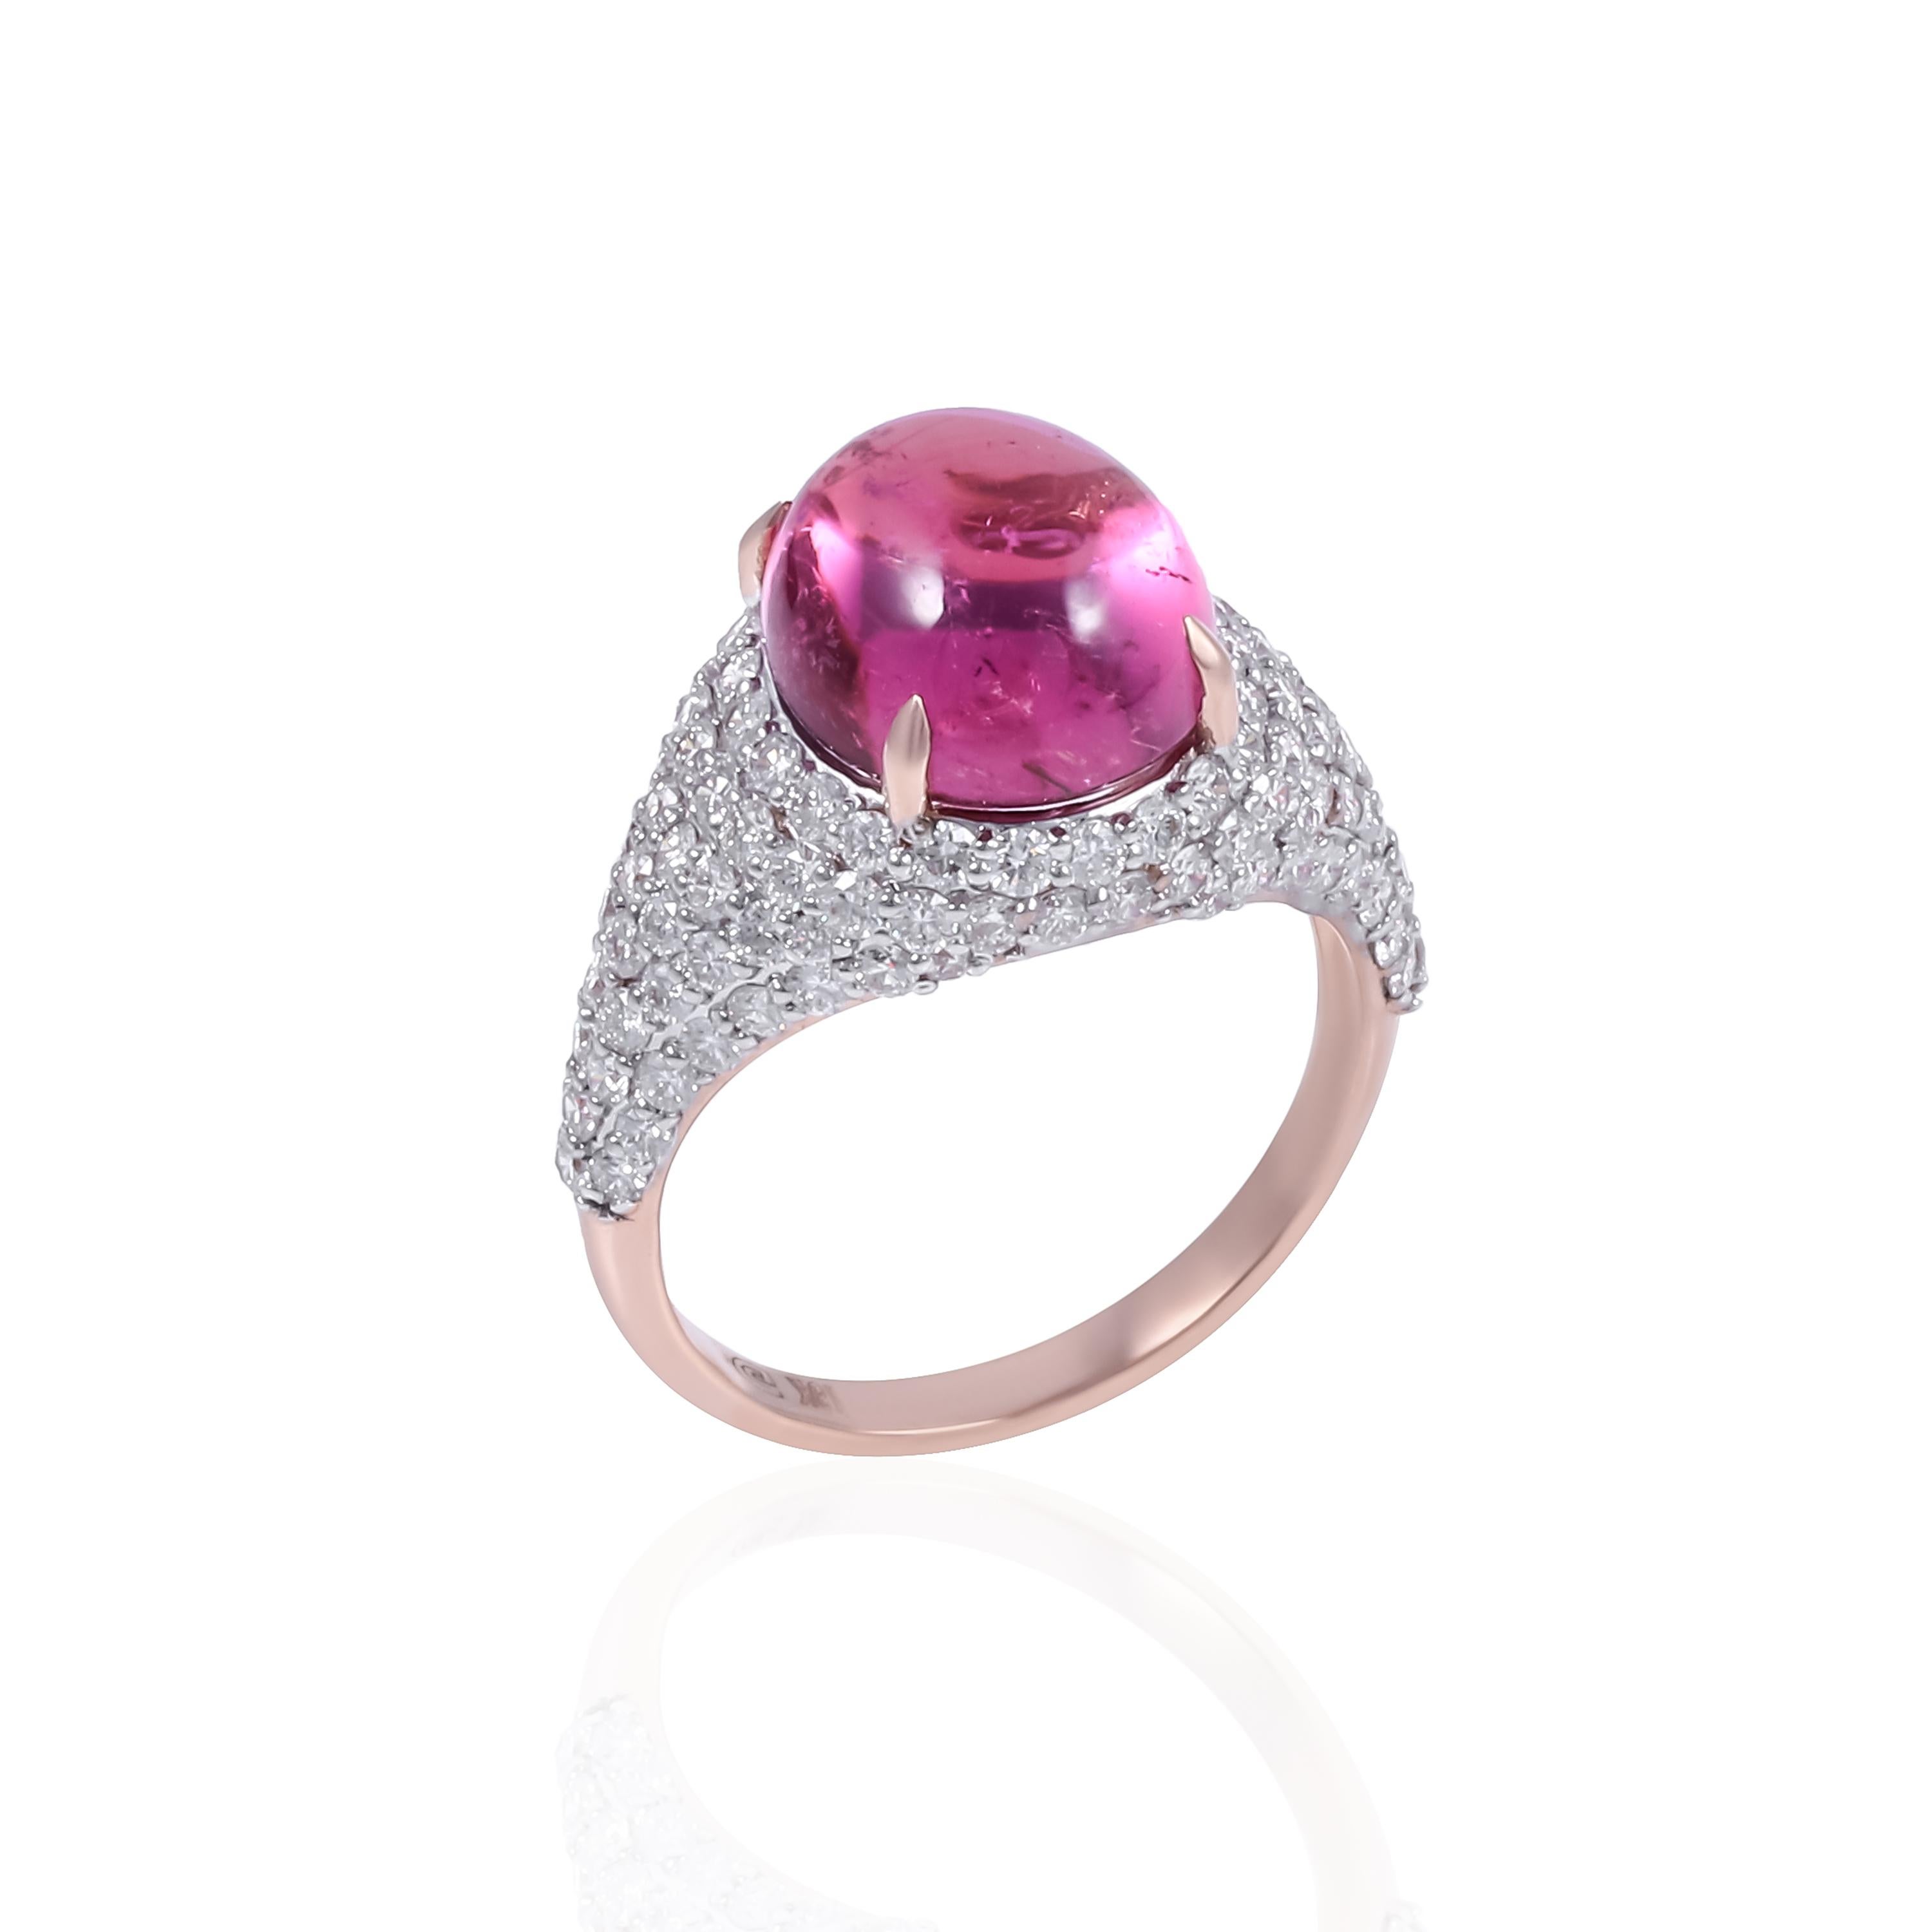 Cabochon Pink Tourmaline Ring 6.55 Carat with Diamonds on the side band For Sale